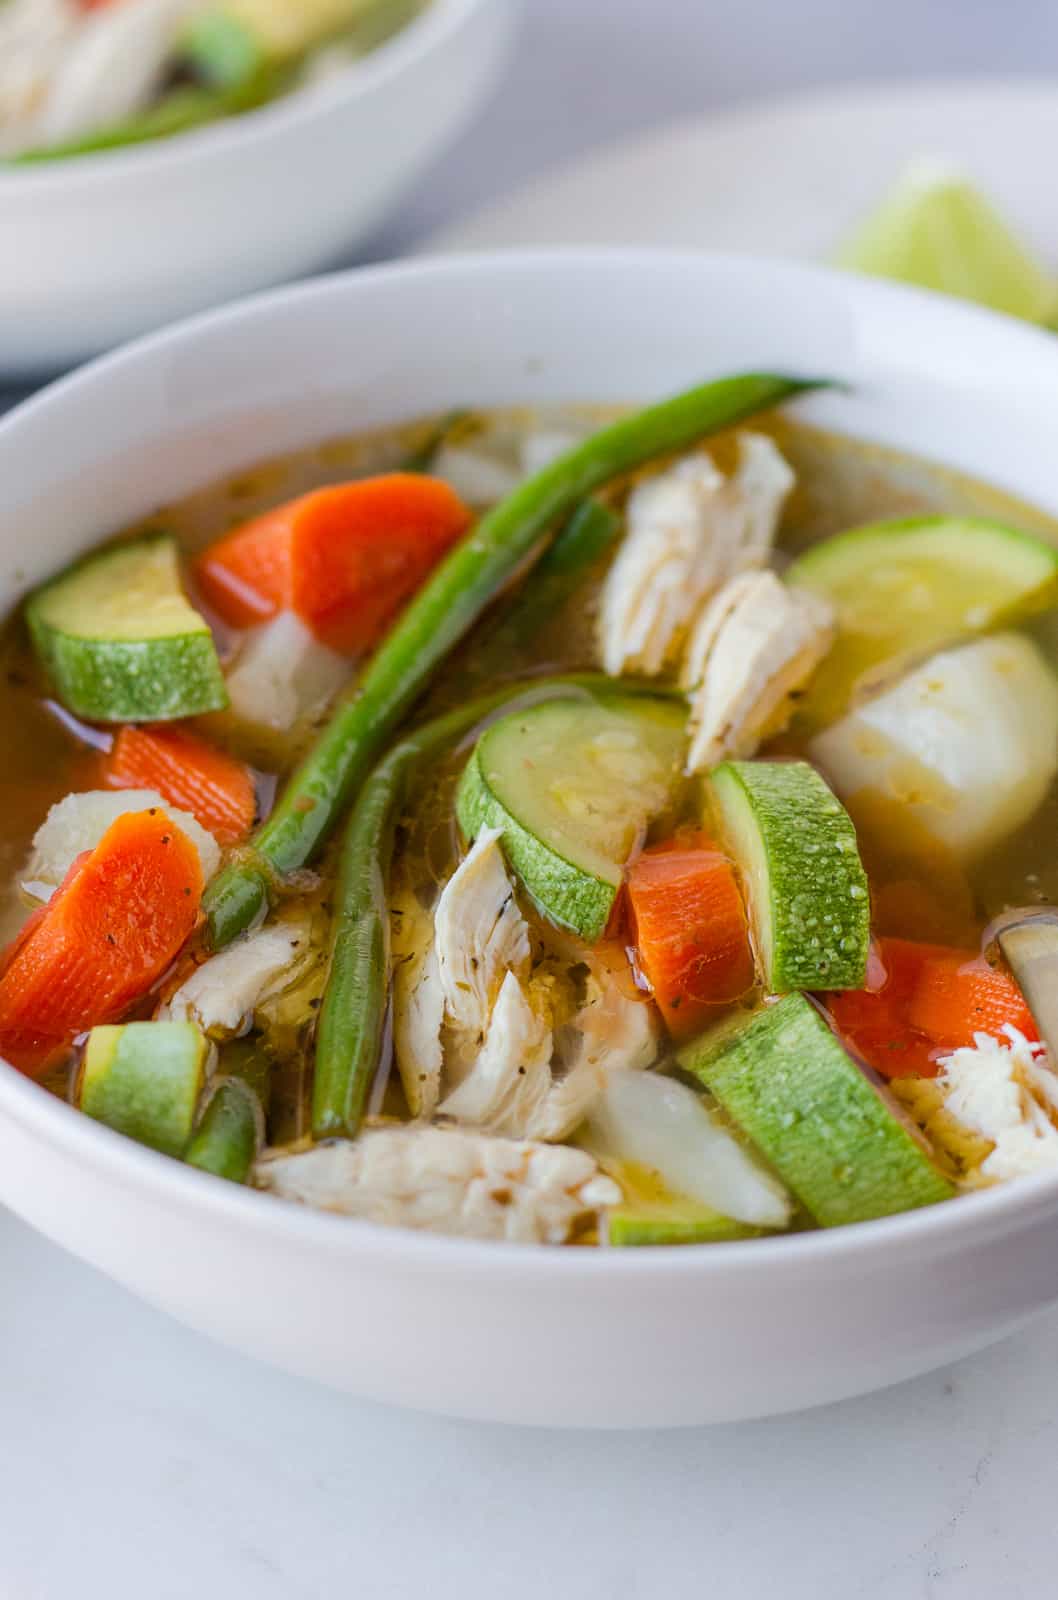 Up close view of soup with chicken and vegetable pieces.